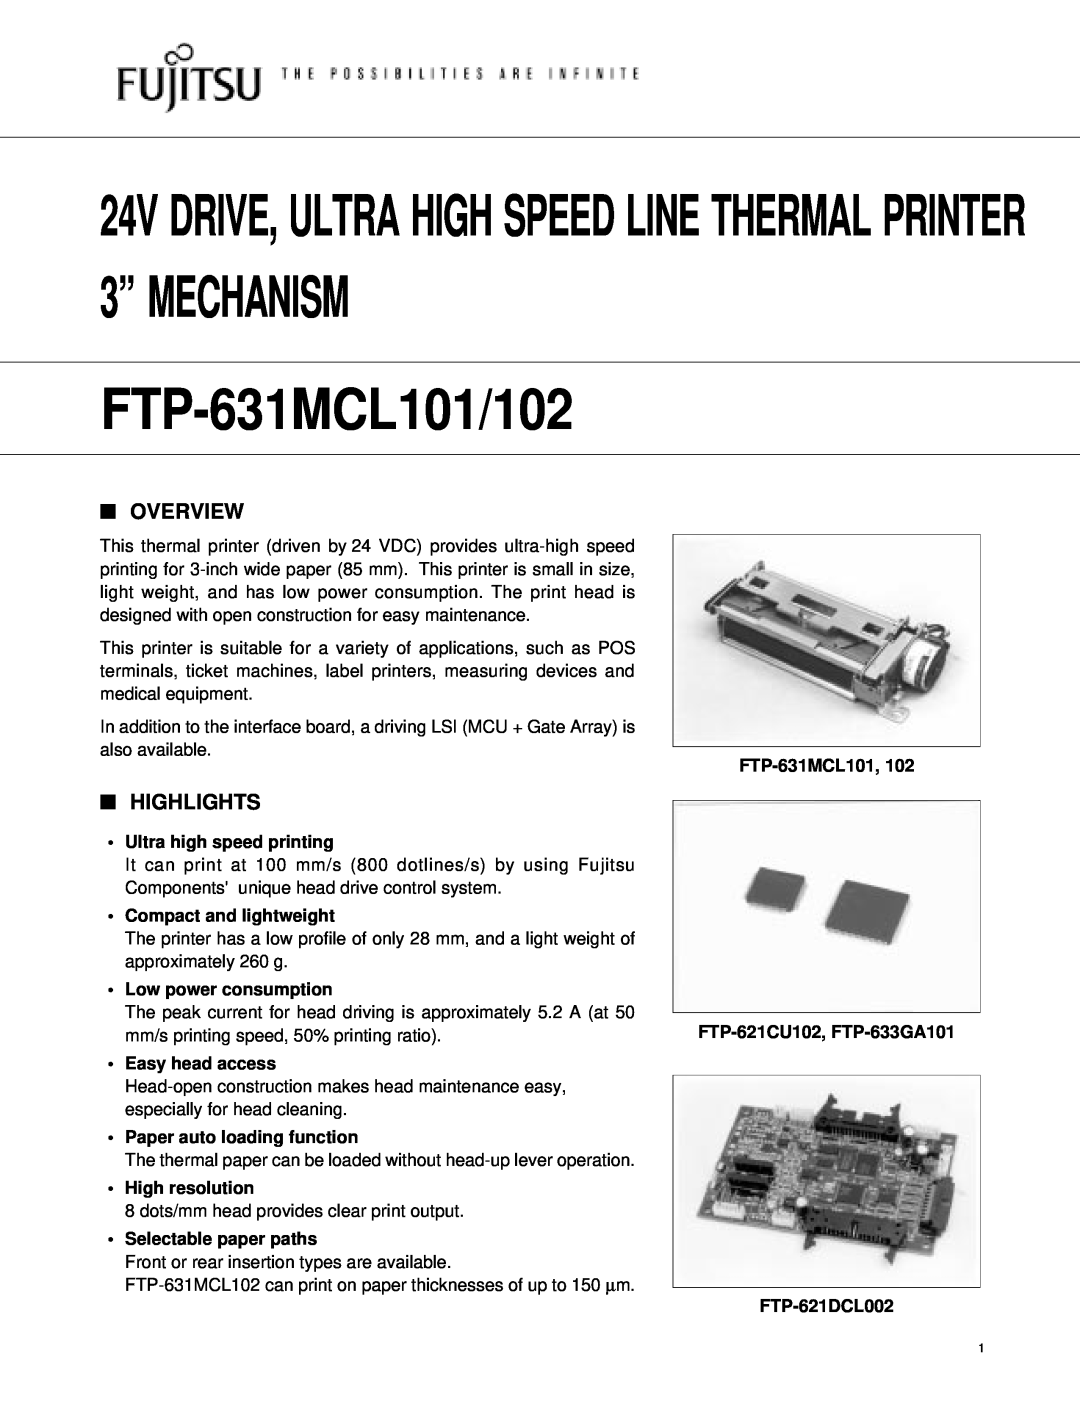 Fujitsu FTP-631MCL102 manual Overview, Highlights, Ultra high speed printing, Compact and lightweight, Easy head access 